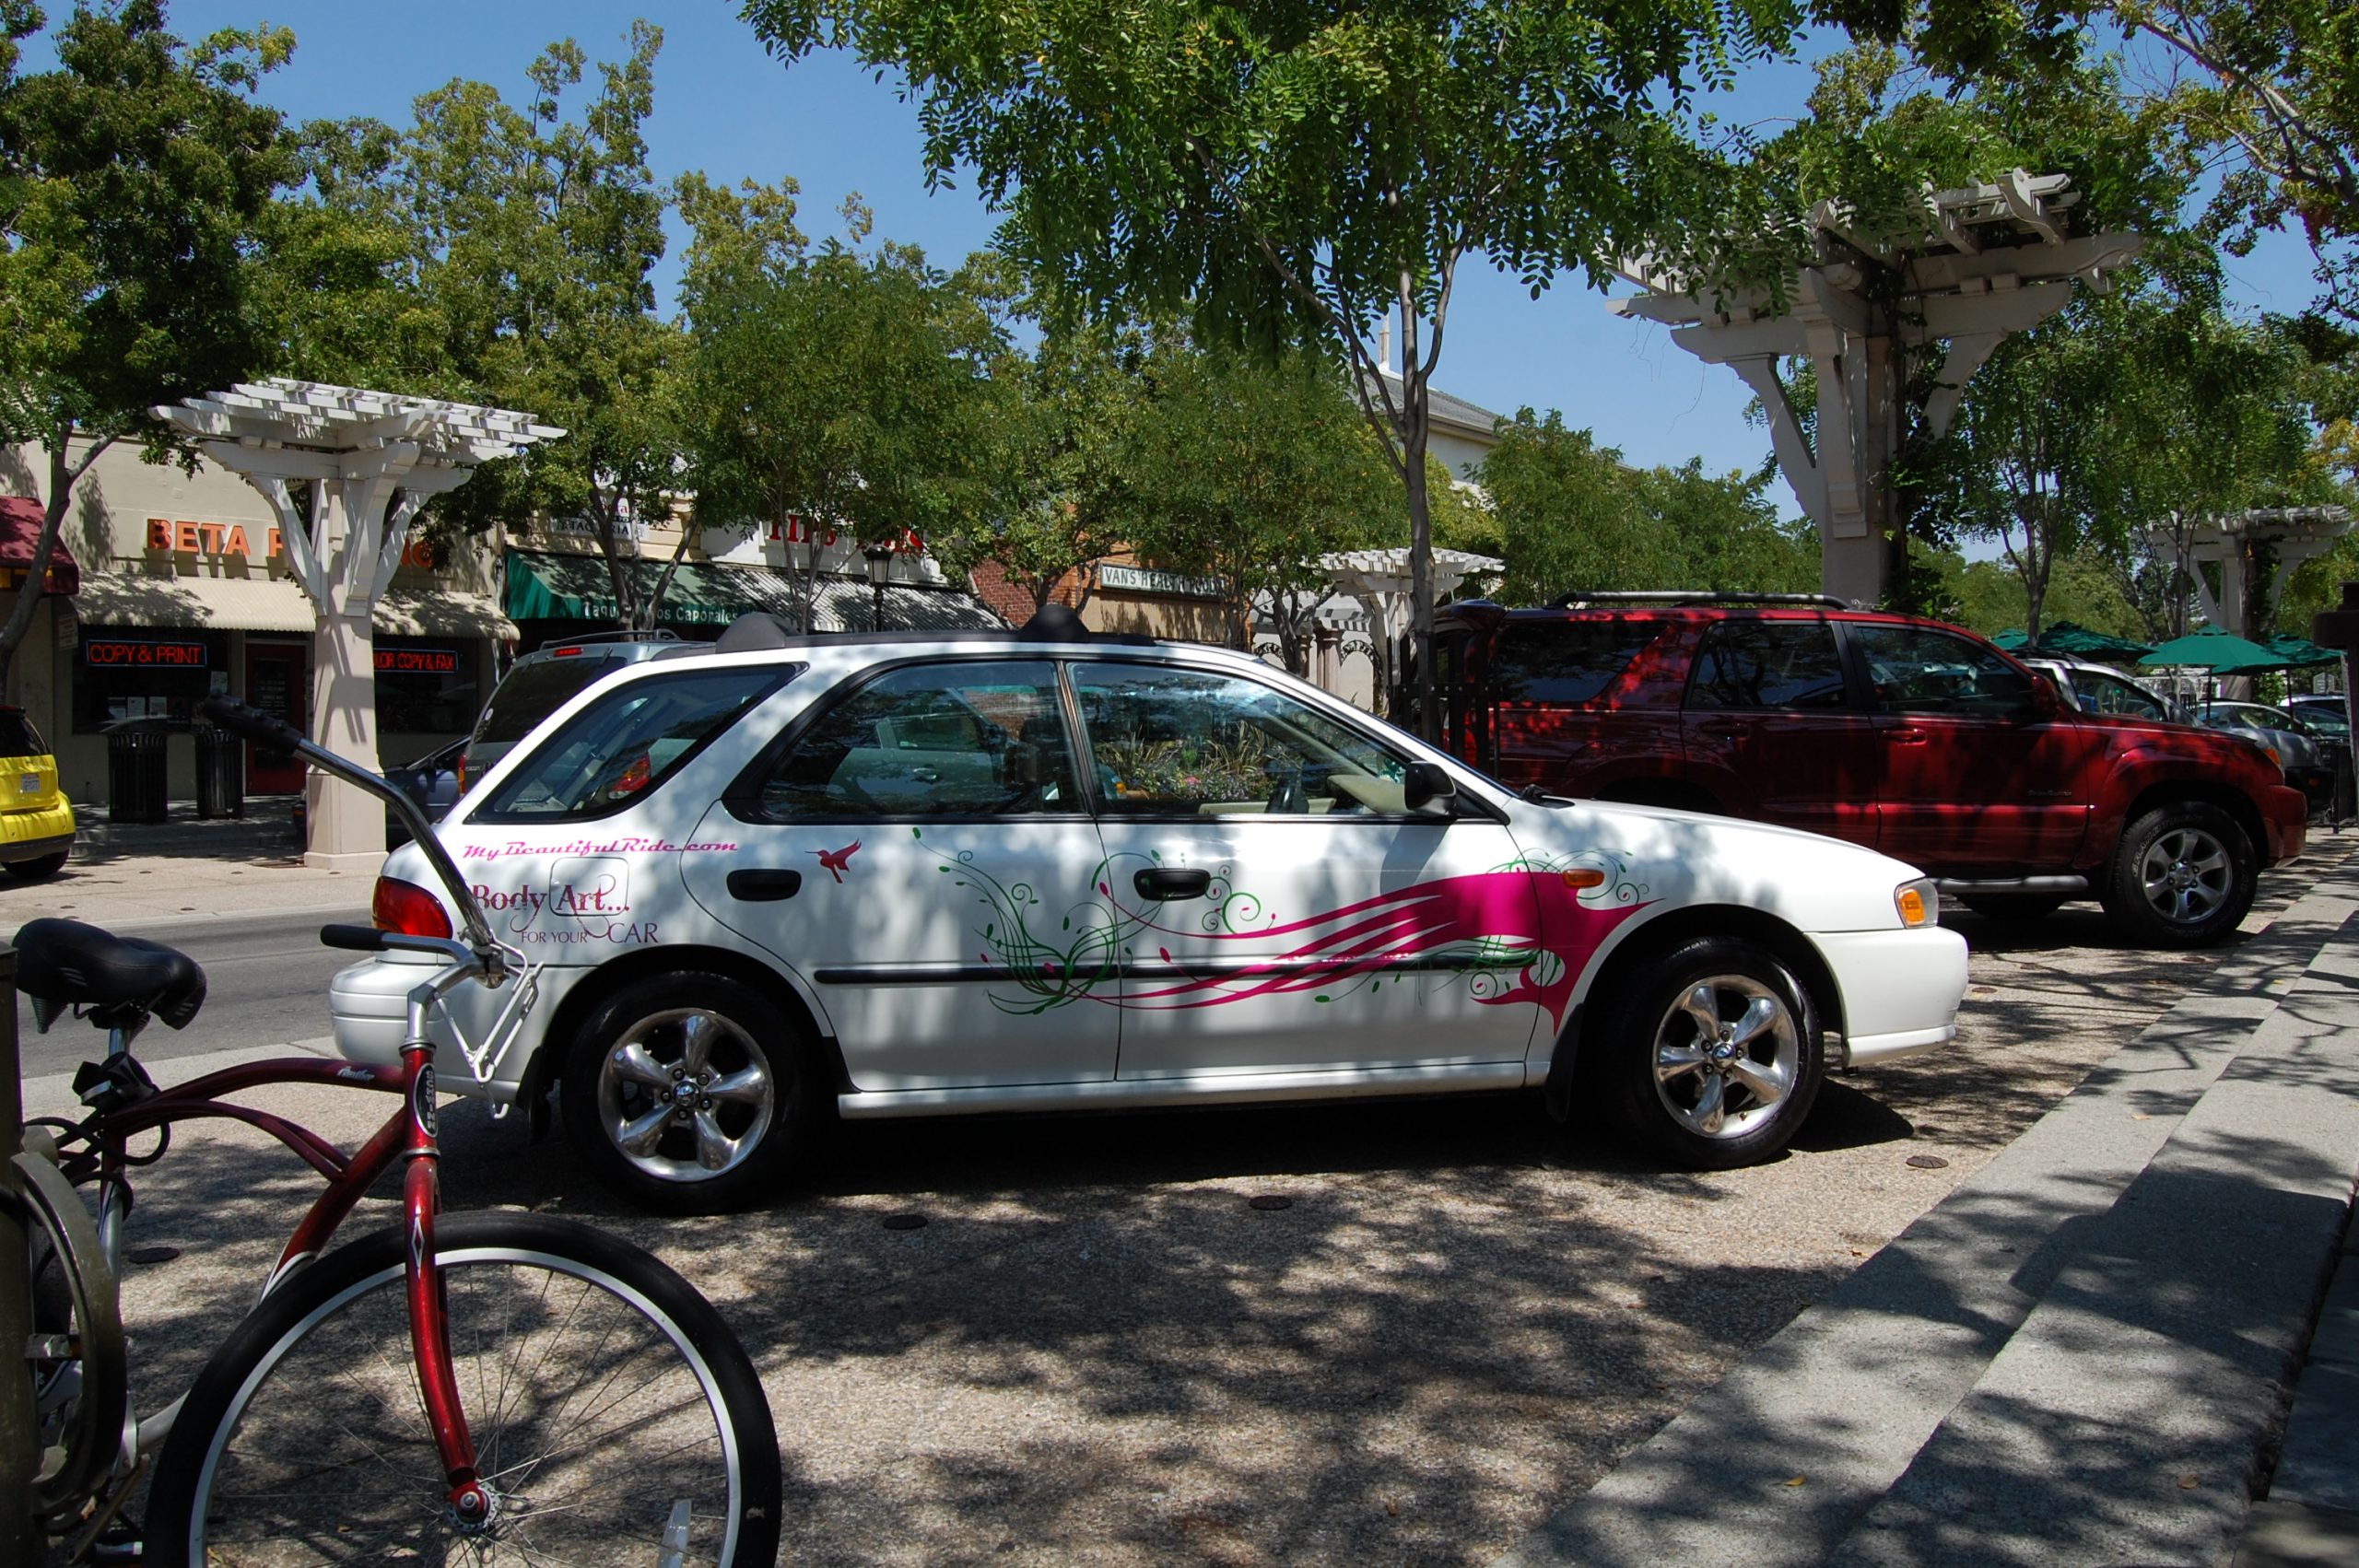 White Subaru body art for your car & hummingbird with pink green decals red bike in foreground